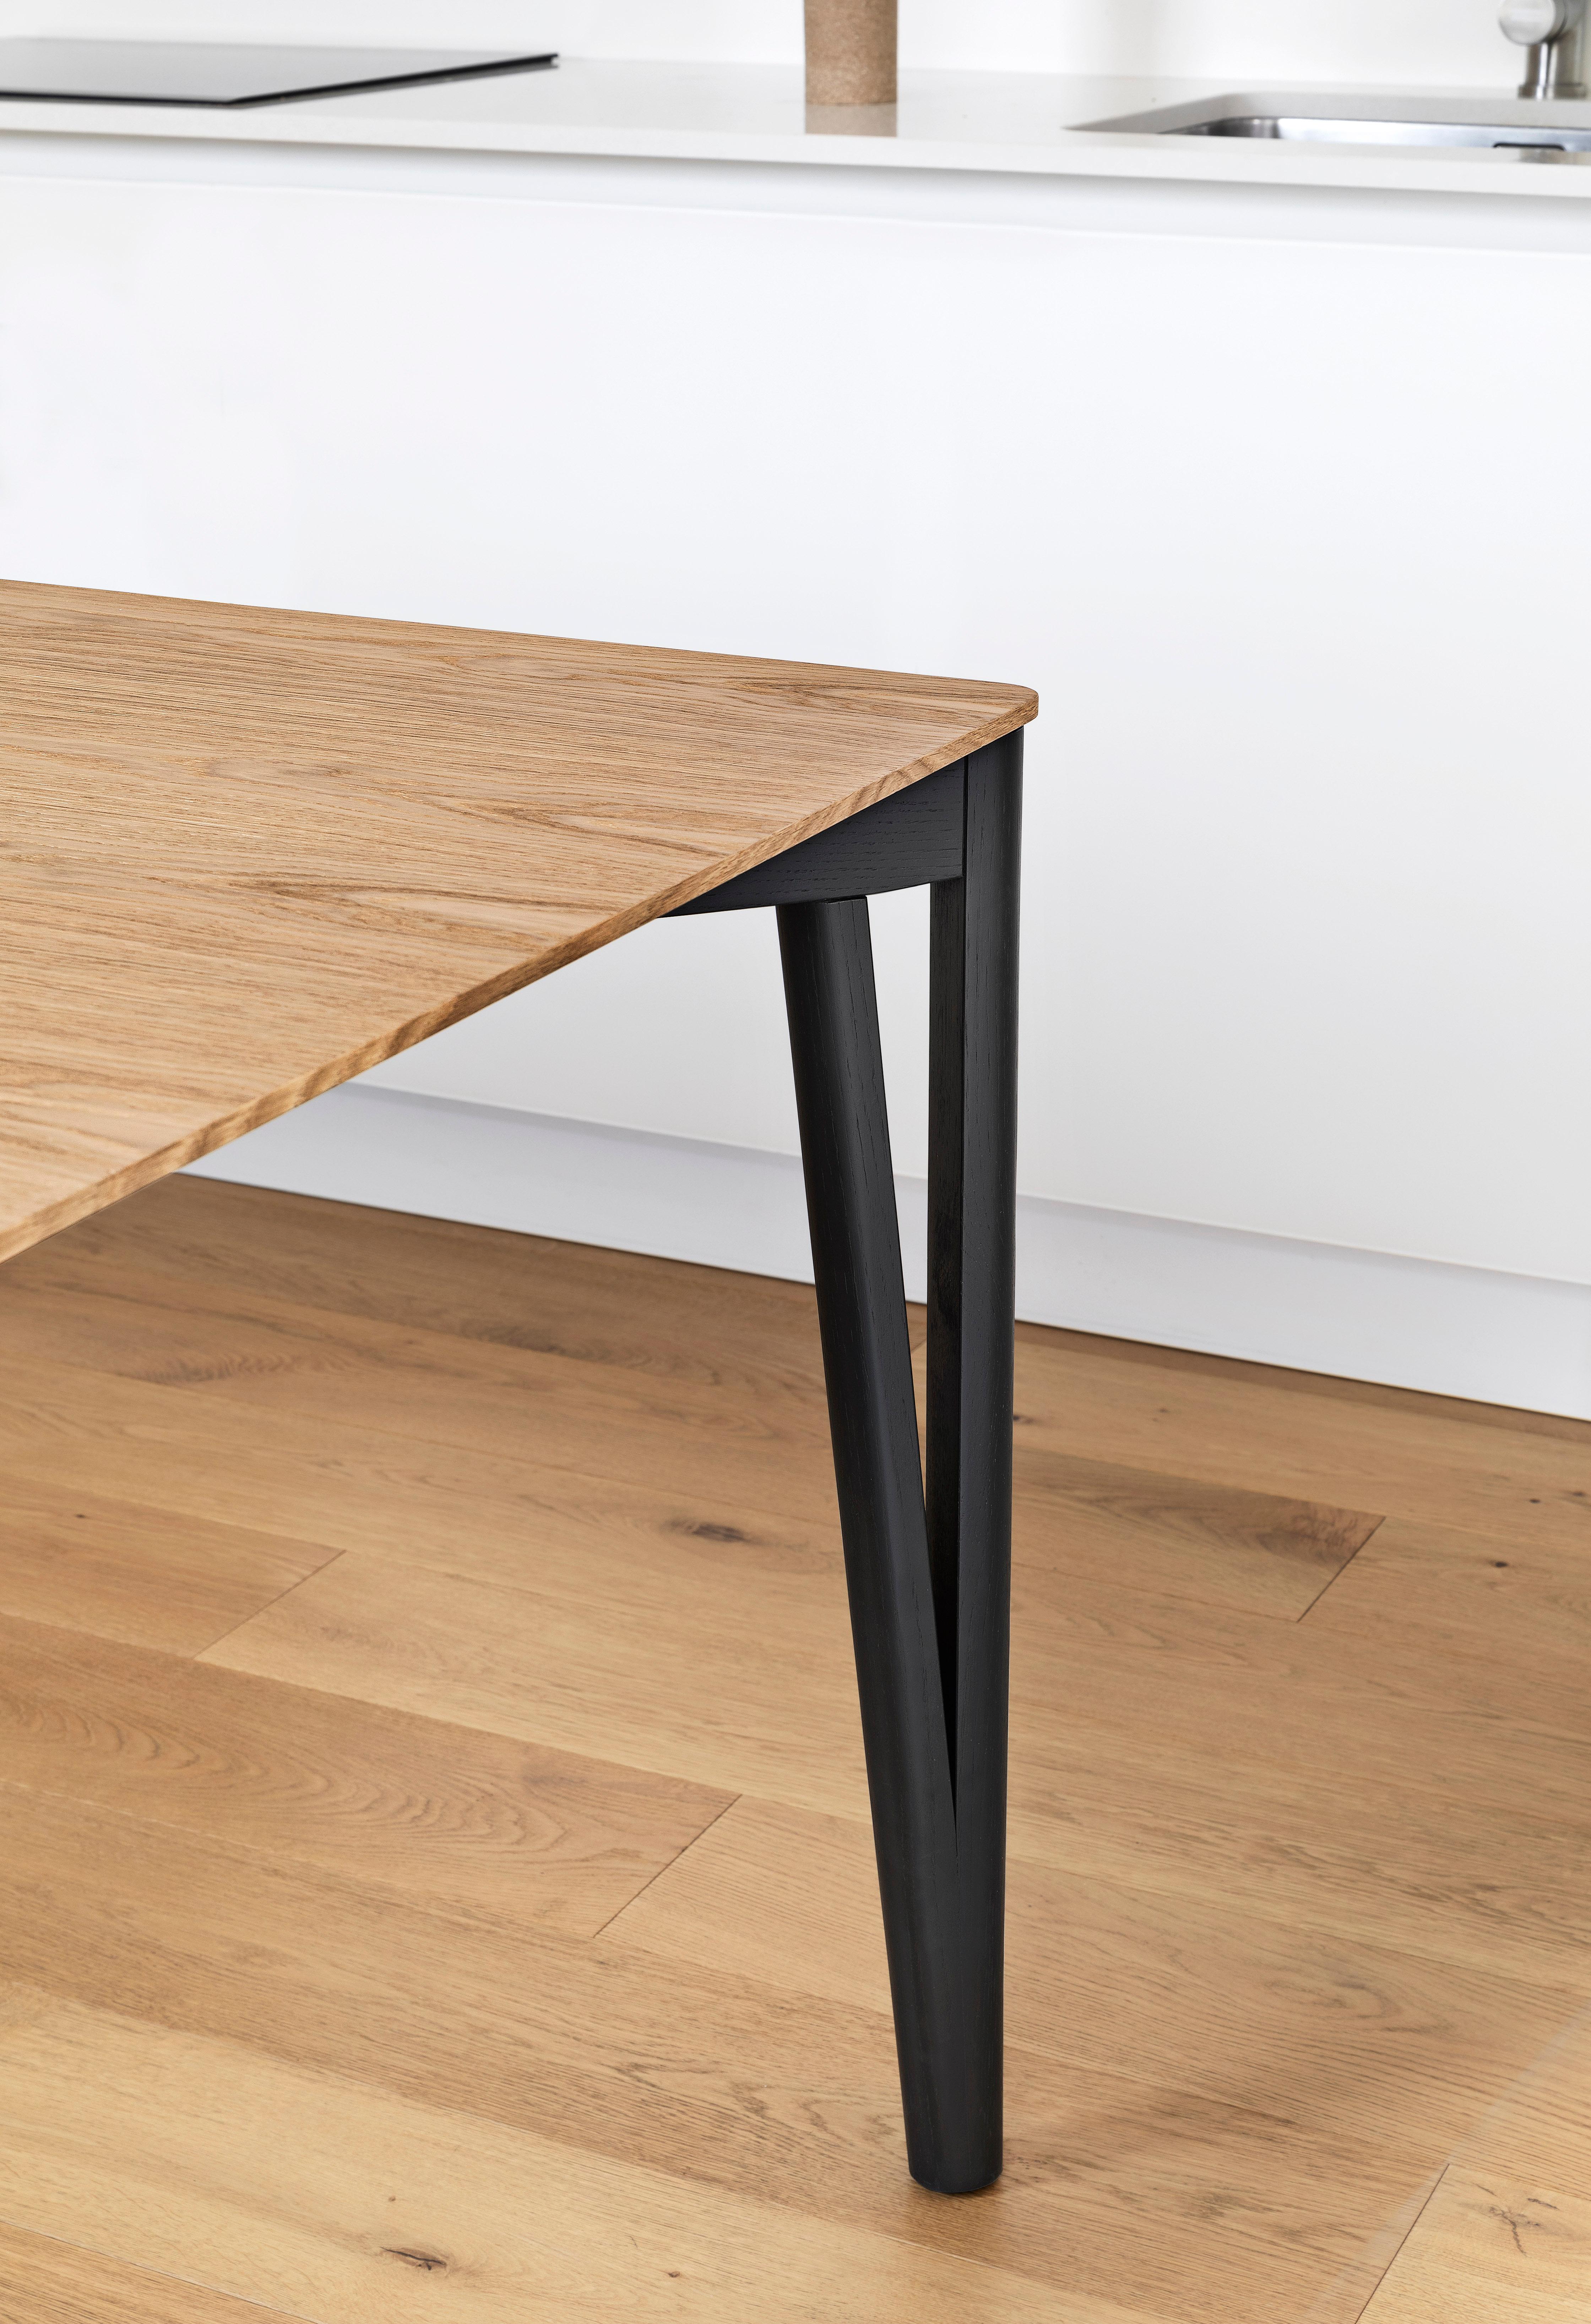 Decapo Extendible Table in Black Aniline Base, by Francesco Beghetto For Sale 3